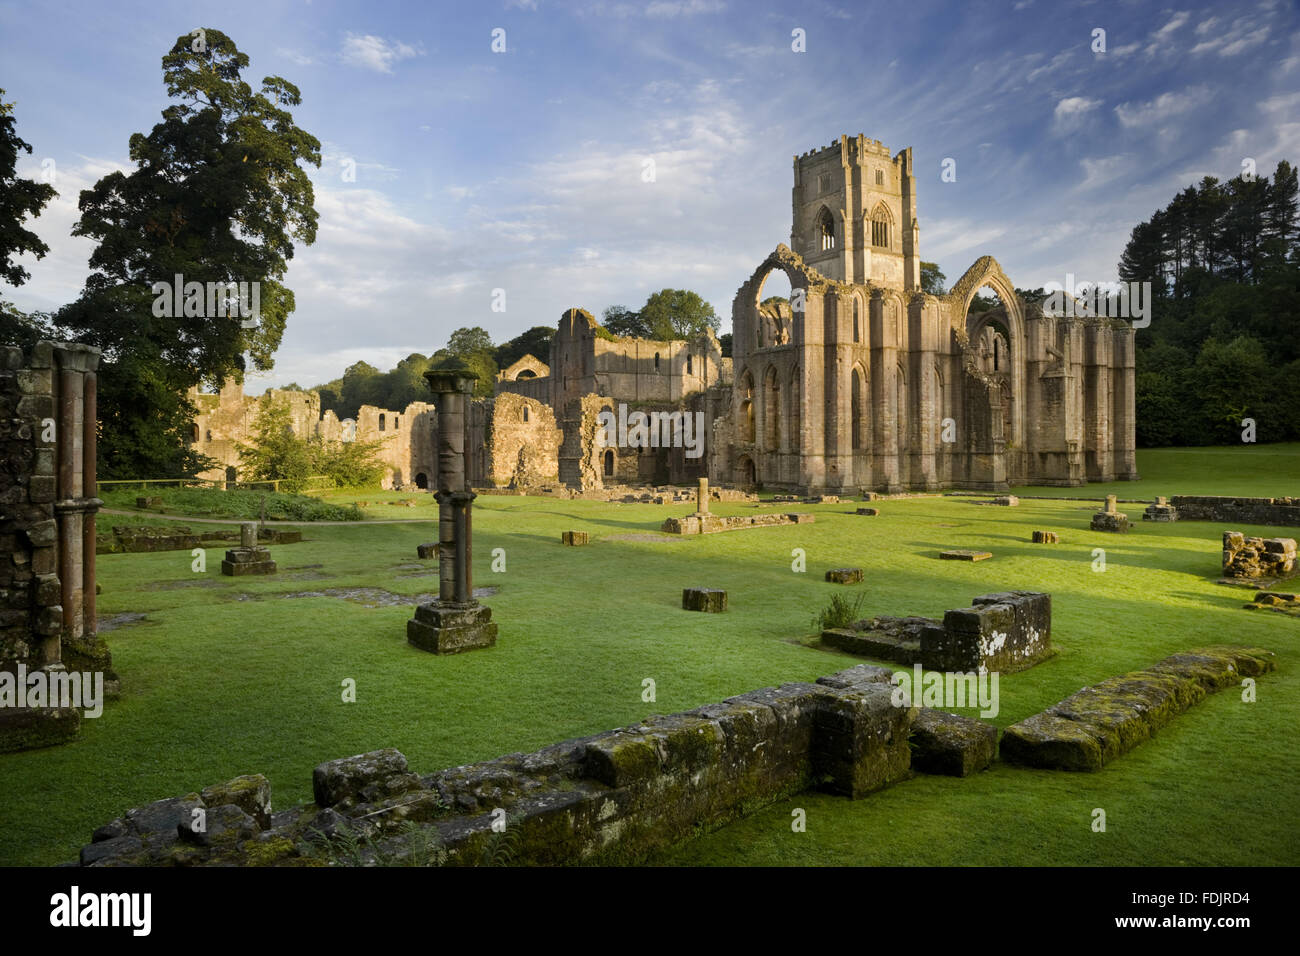 A view towards the east end of the Abbey church showing the great east window arch at Fountains Abbey, North Yorkshire. Remains of the monks' infirmary are visible in the foreground. The Cistercian community of monks was founded here in 1132 but was disso Stock Photo